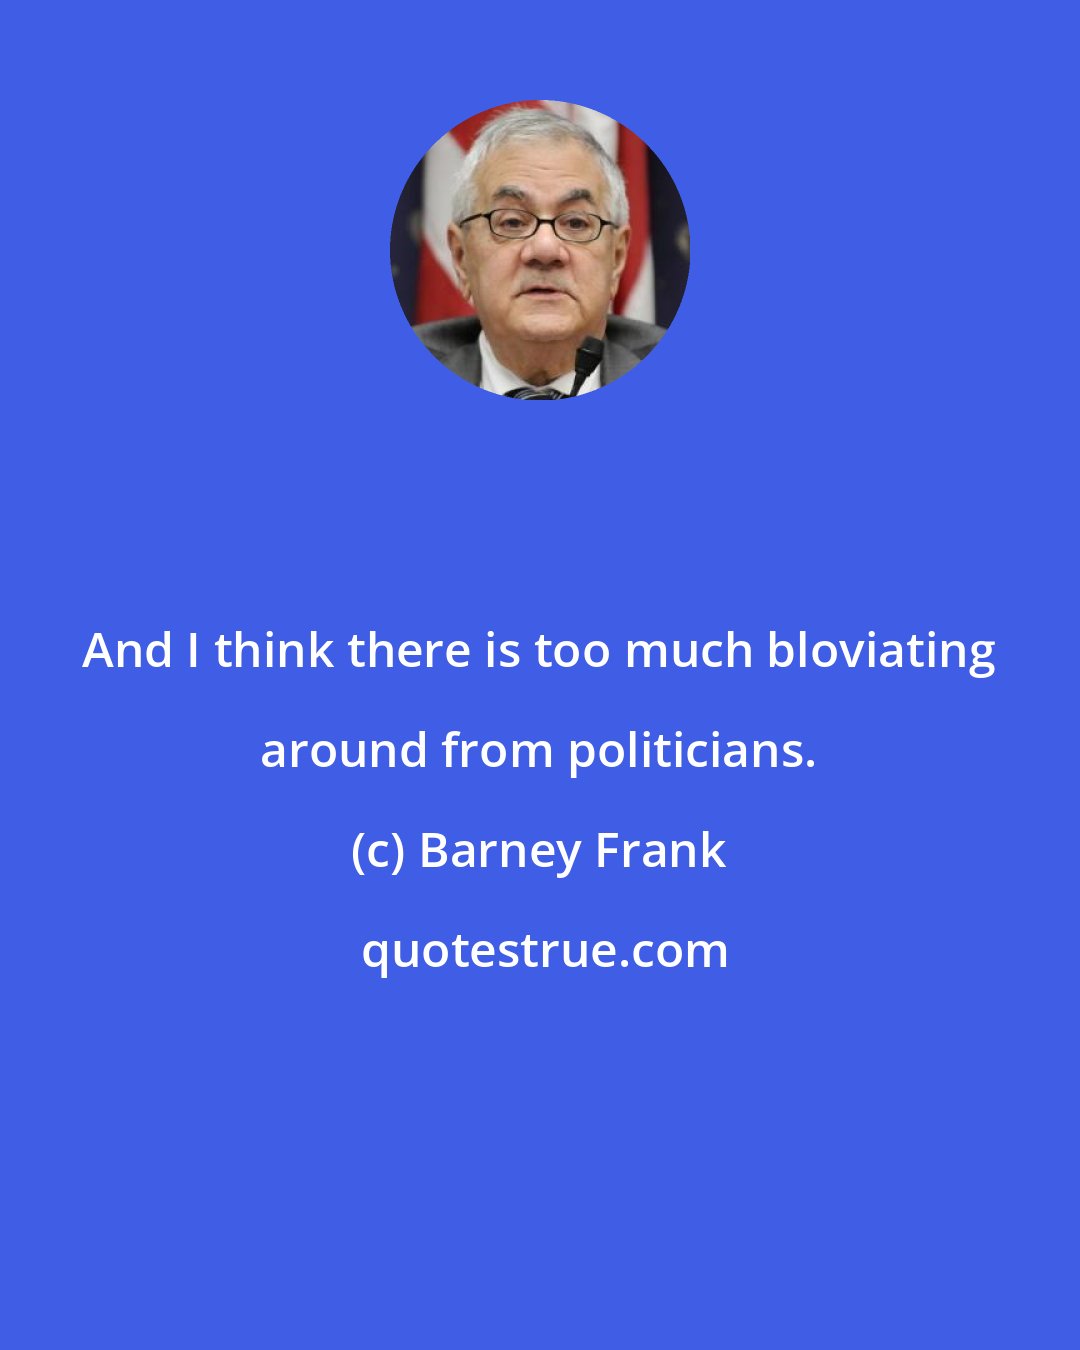 Barney Frank: And I think there is too much bloviating around from politicians.